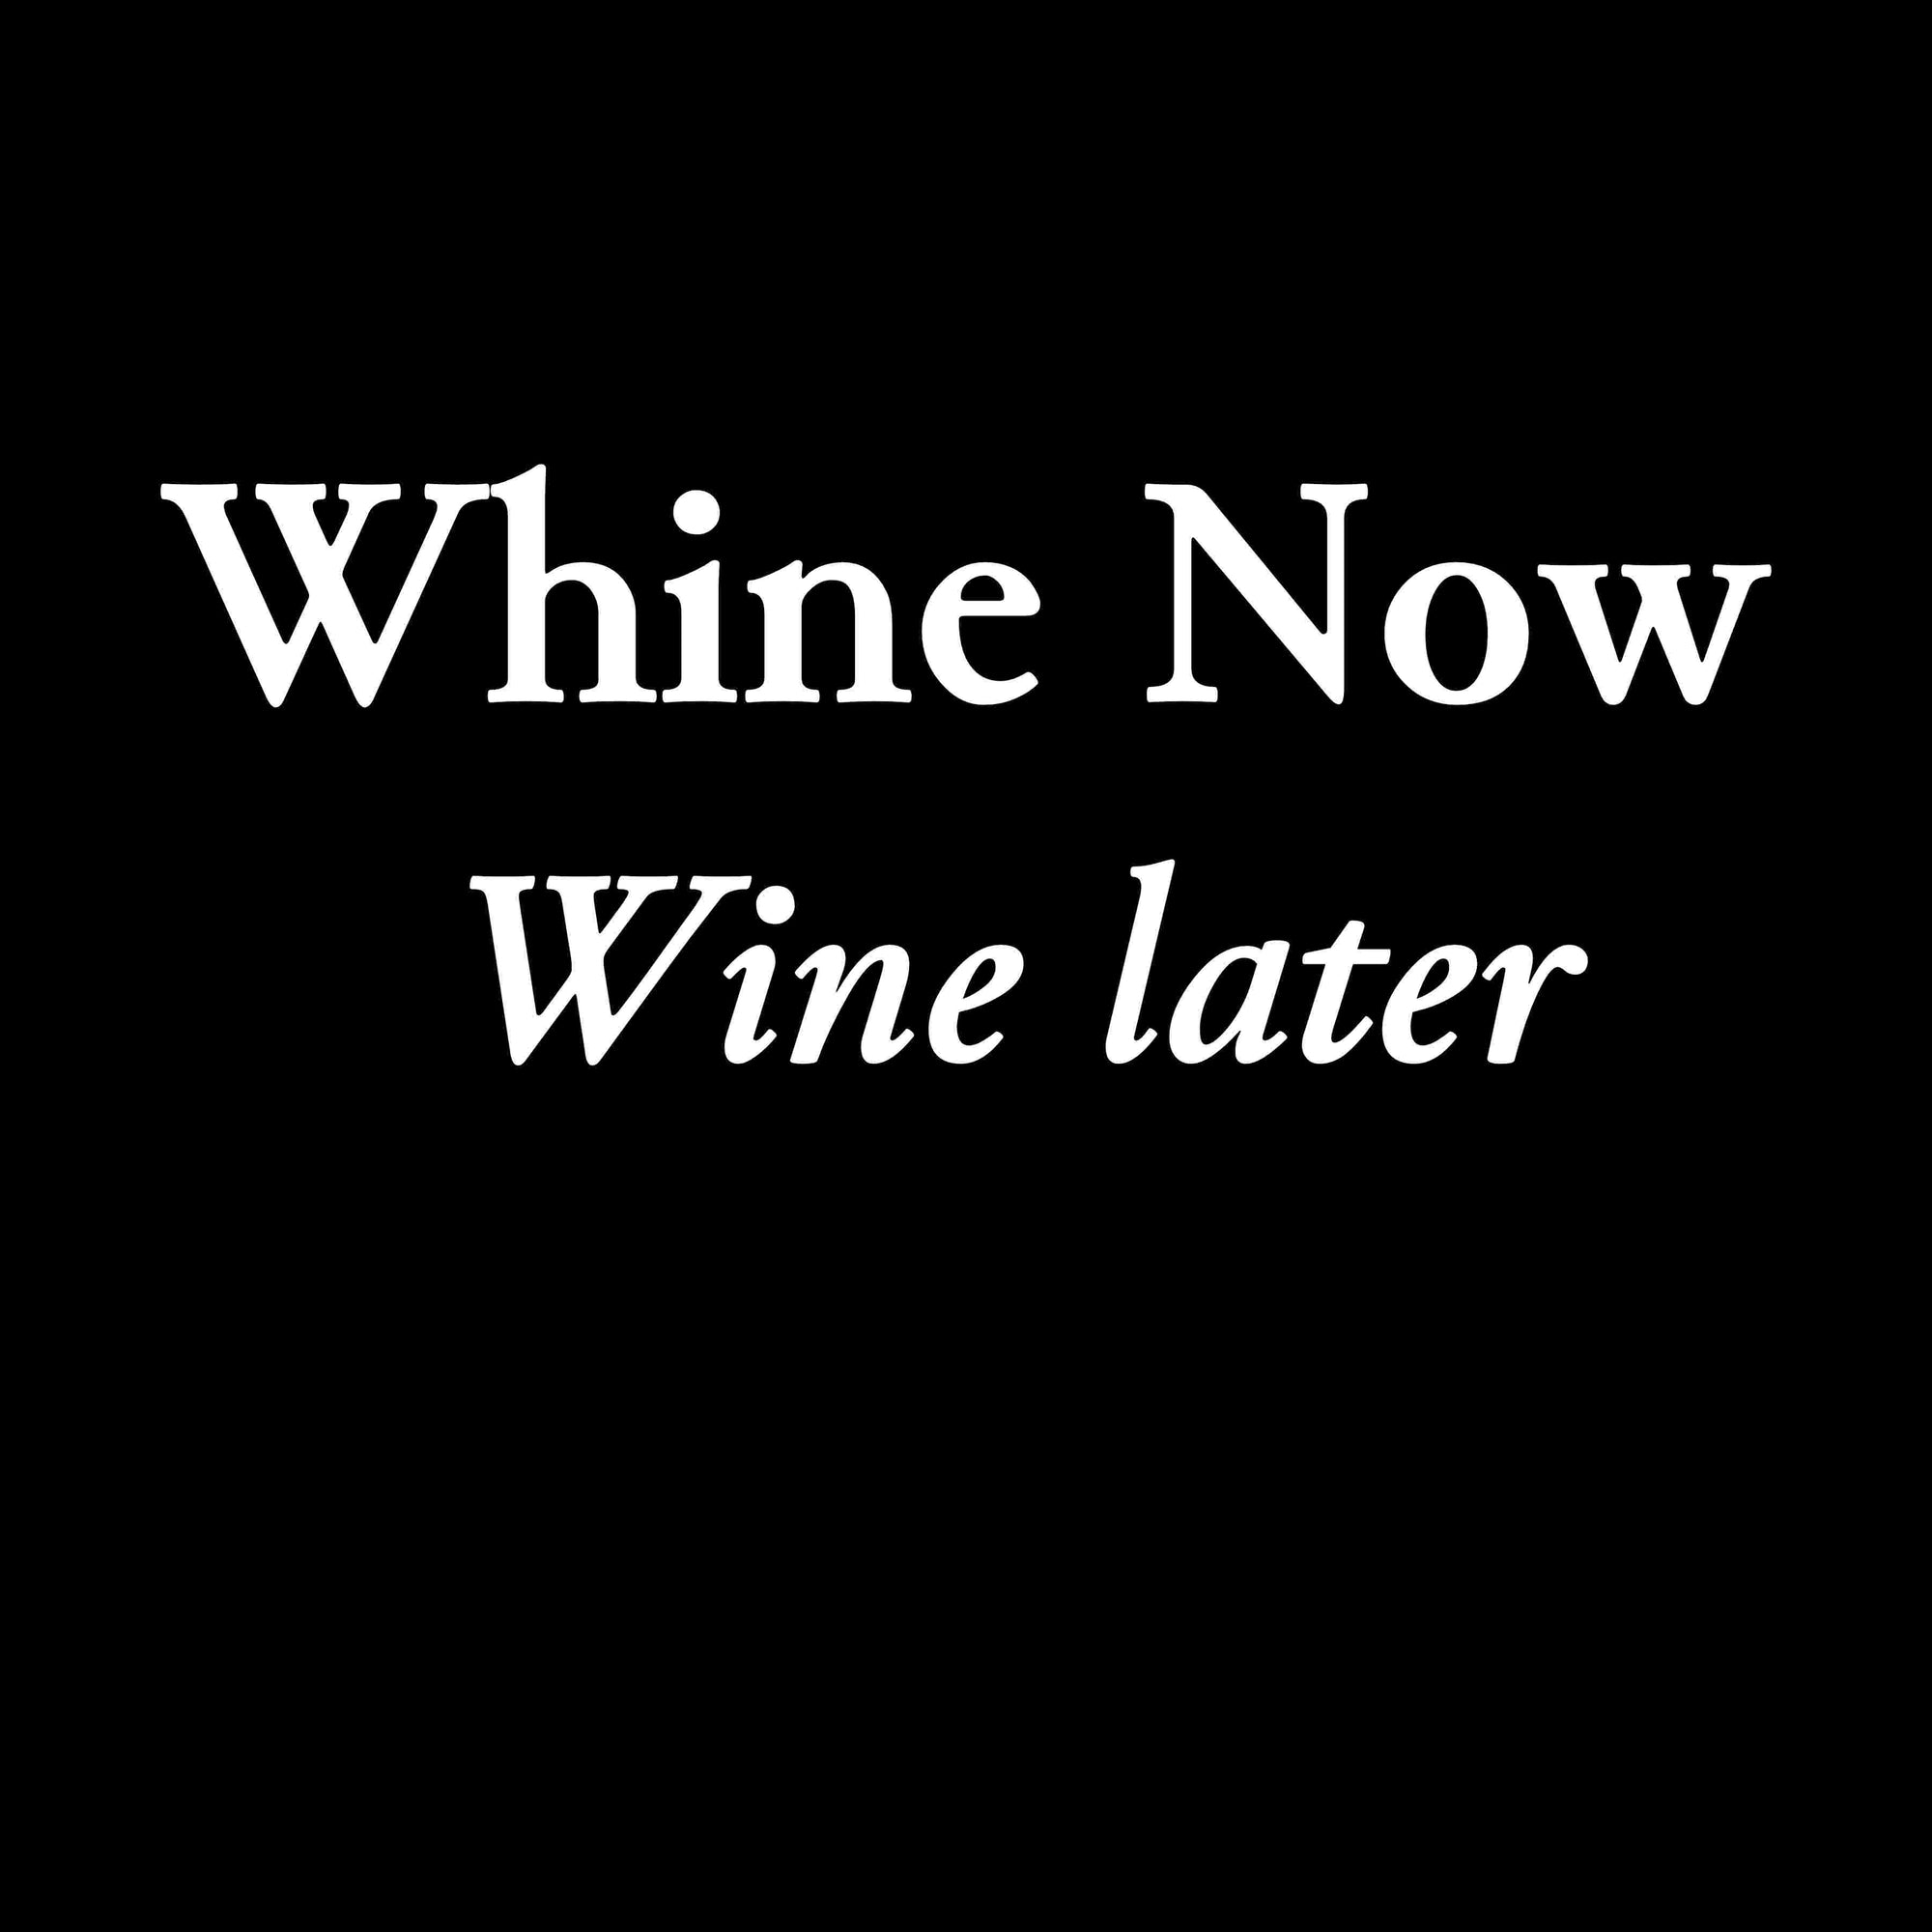 Whine Now, Wine later Printed T-Shirt-Black